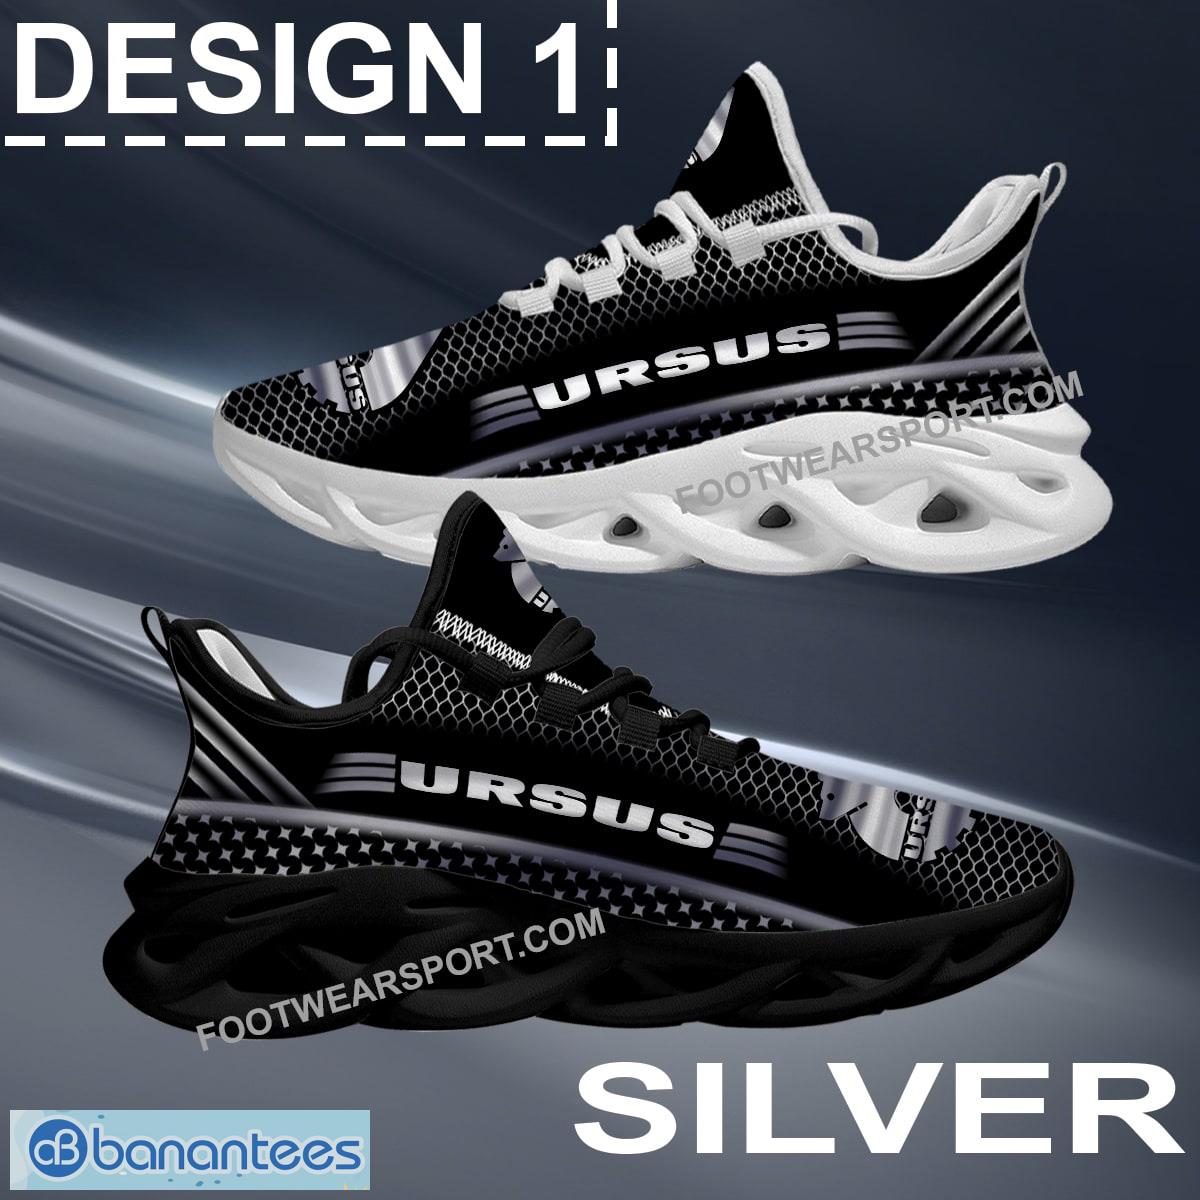 Ursus SA Racing Max Soul Shoes Gold, Diamond, Silver All Over Print Urban Running Sneaker Gift - Car Ursus SA Car Racing Max Soul Shoes Style 1